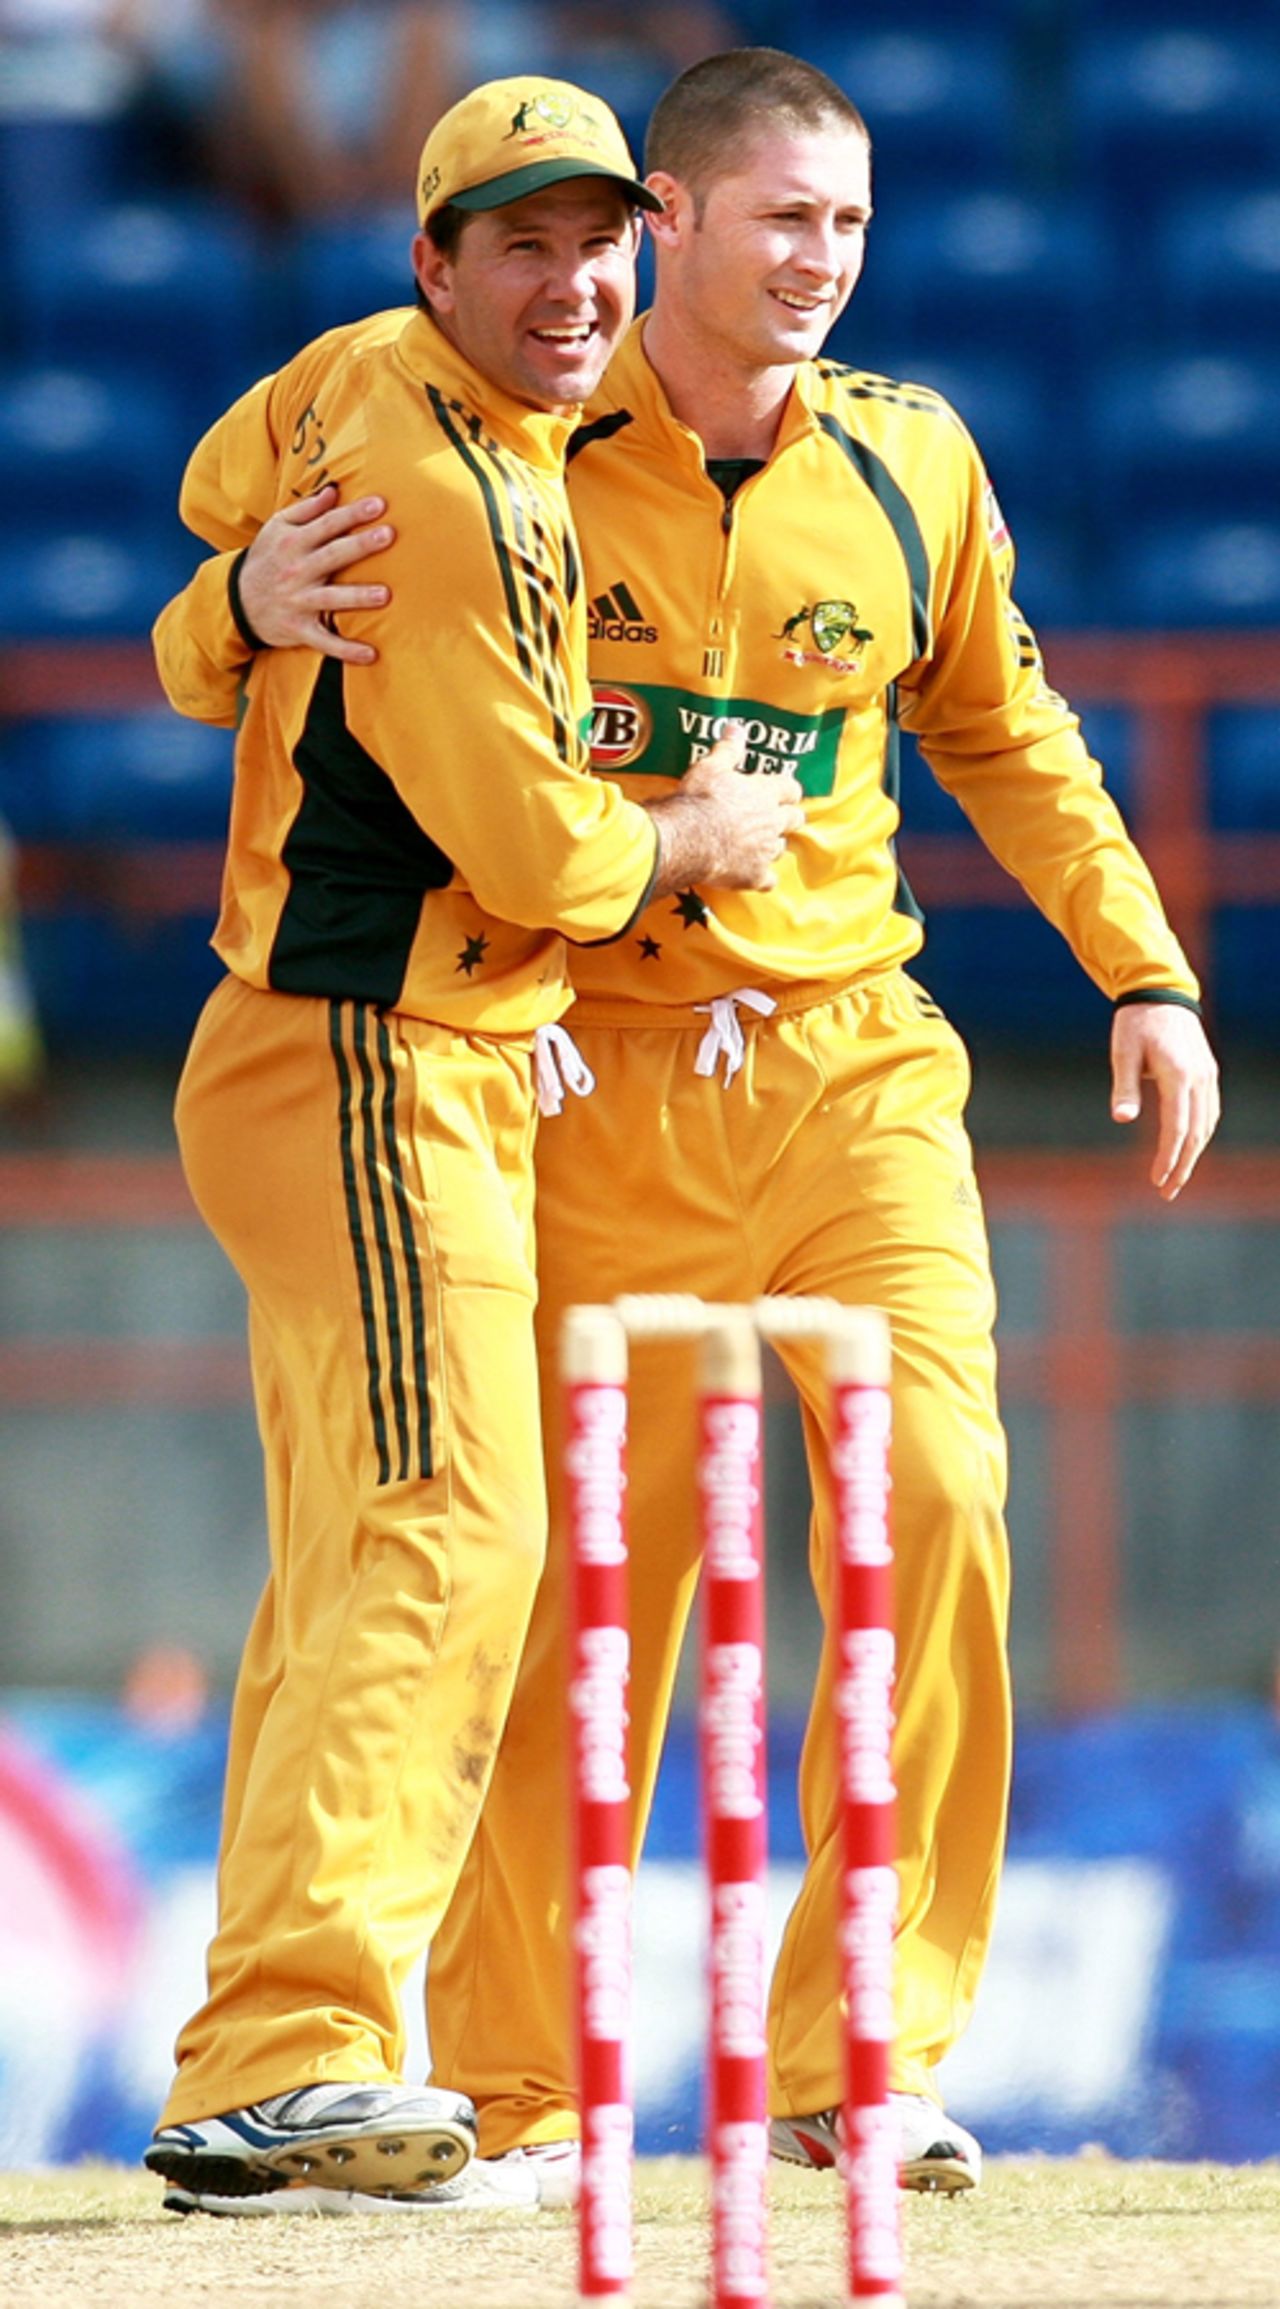 Michael Clarke delivered again, taking two wickets in an over, West Indies v Australia, 2nd ODI, Grenada, June 27, 2008